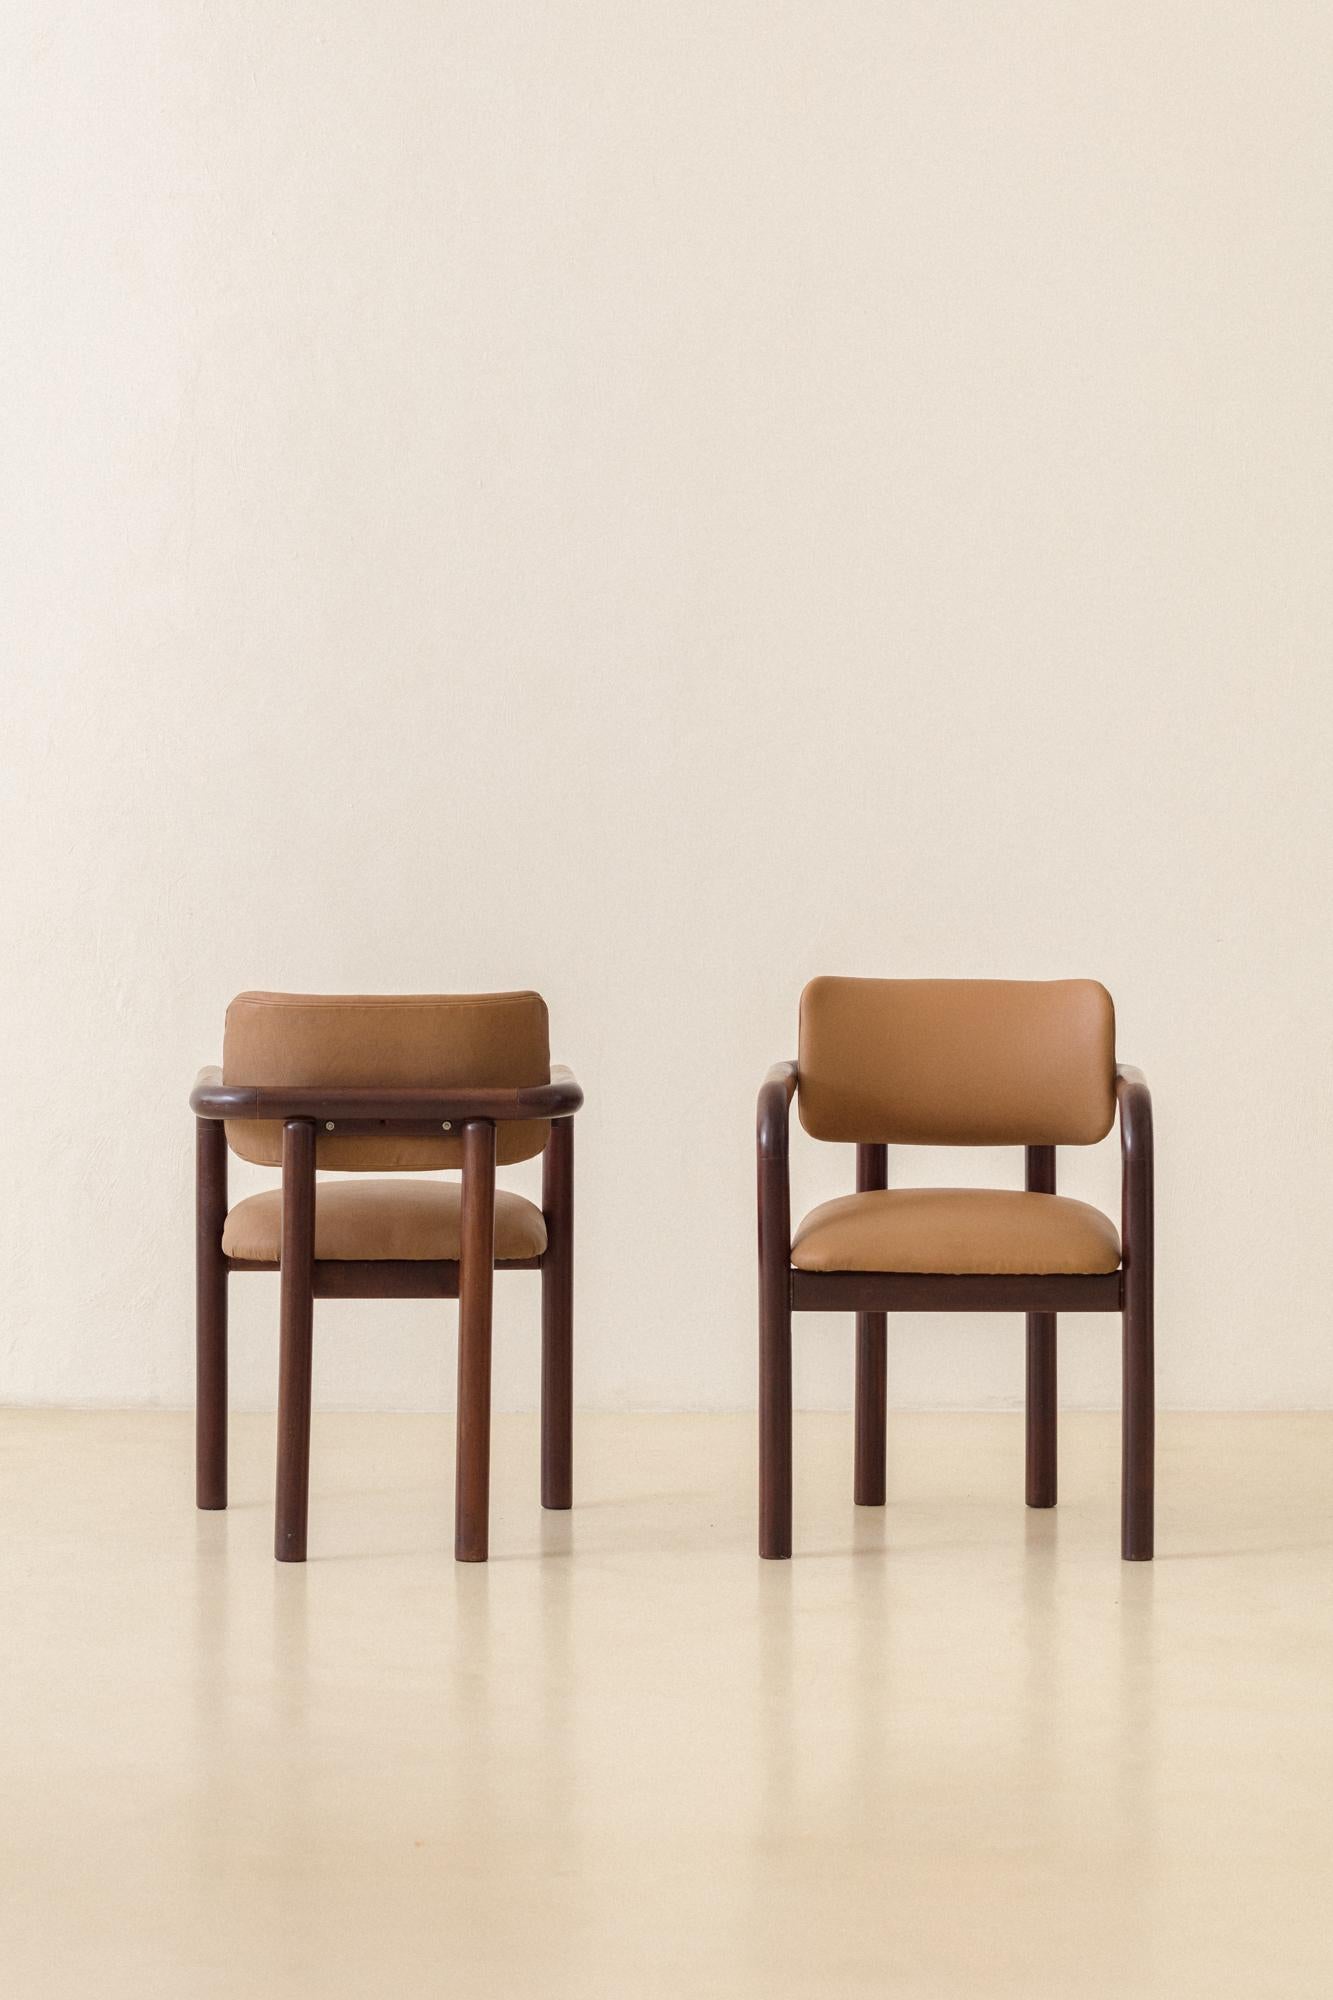 Brazilian Midcentury Design, Solid Imbuia Dining Chairs with Armrests, 1950s For Sale 5